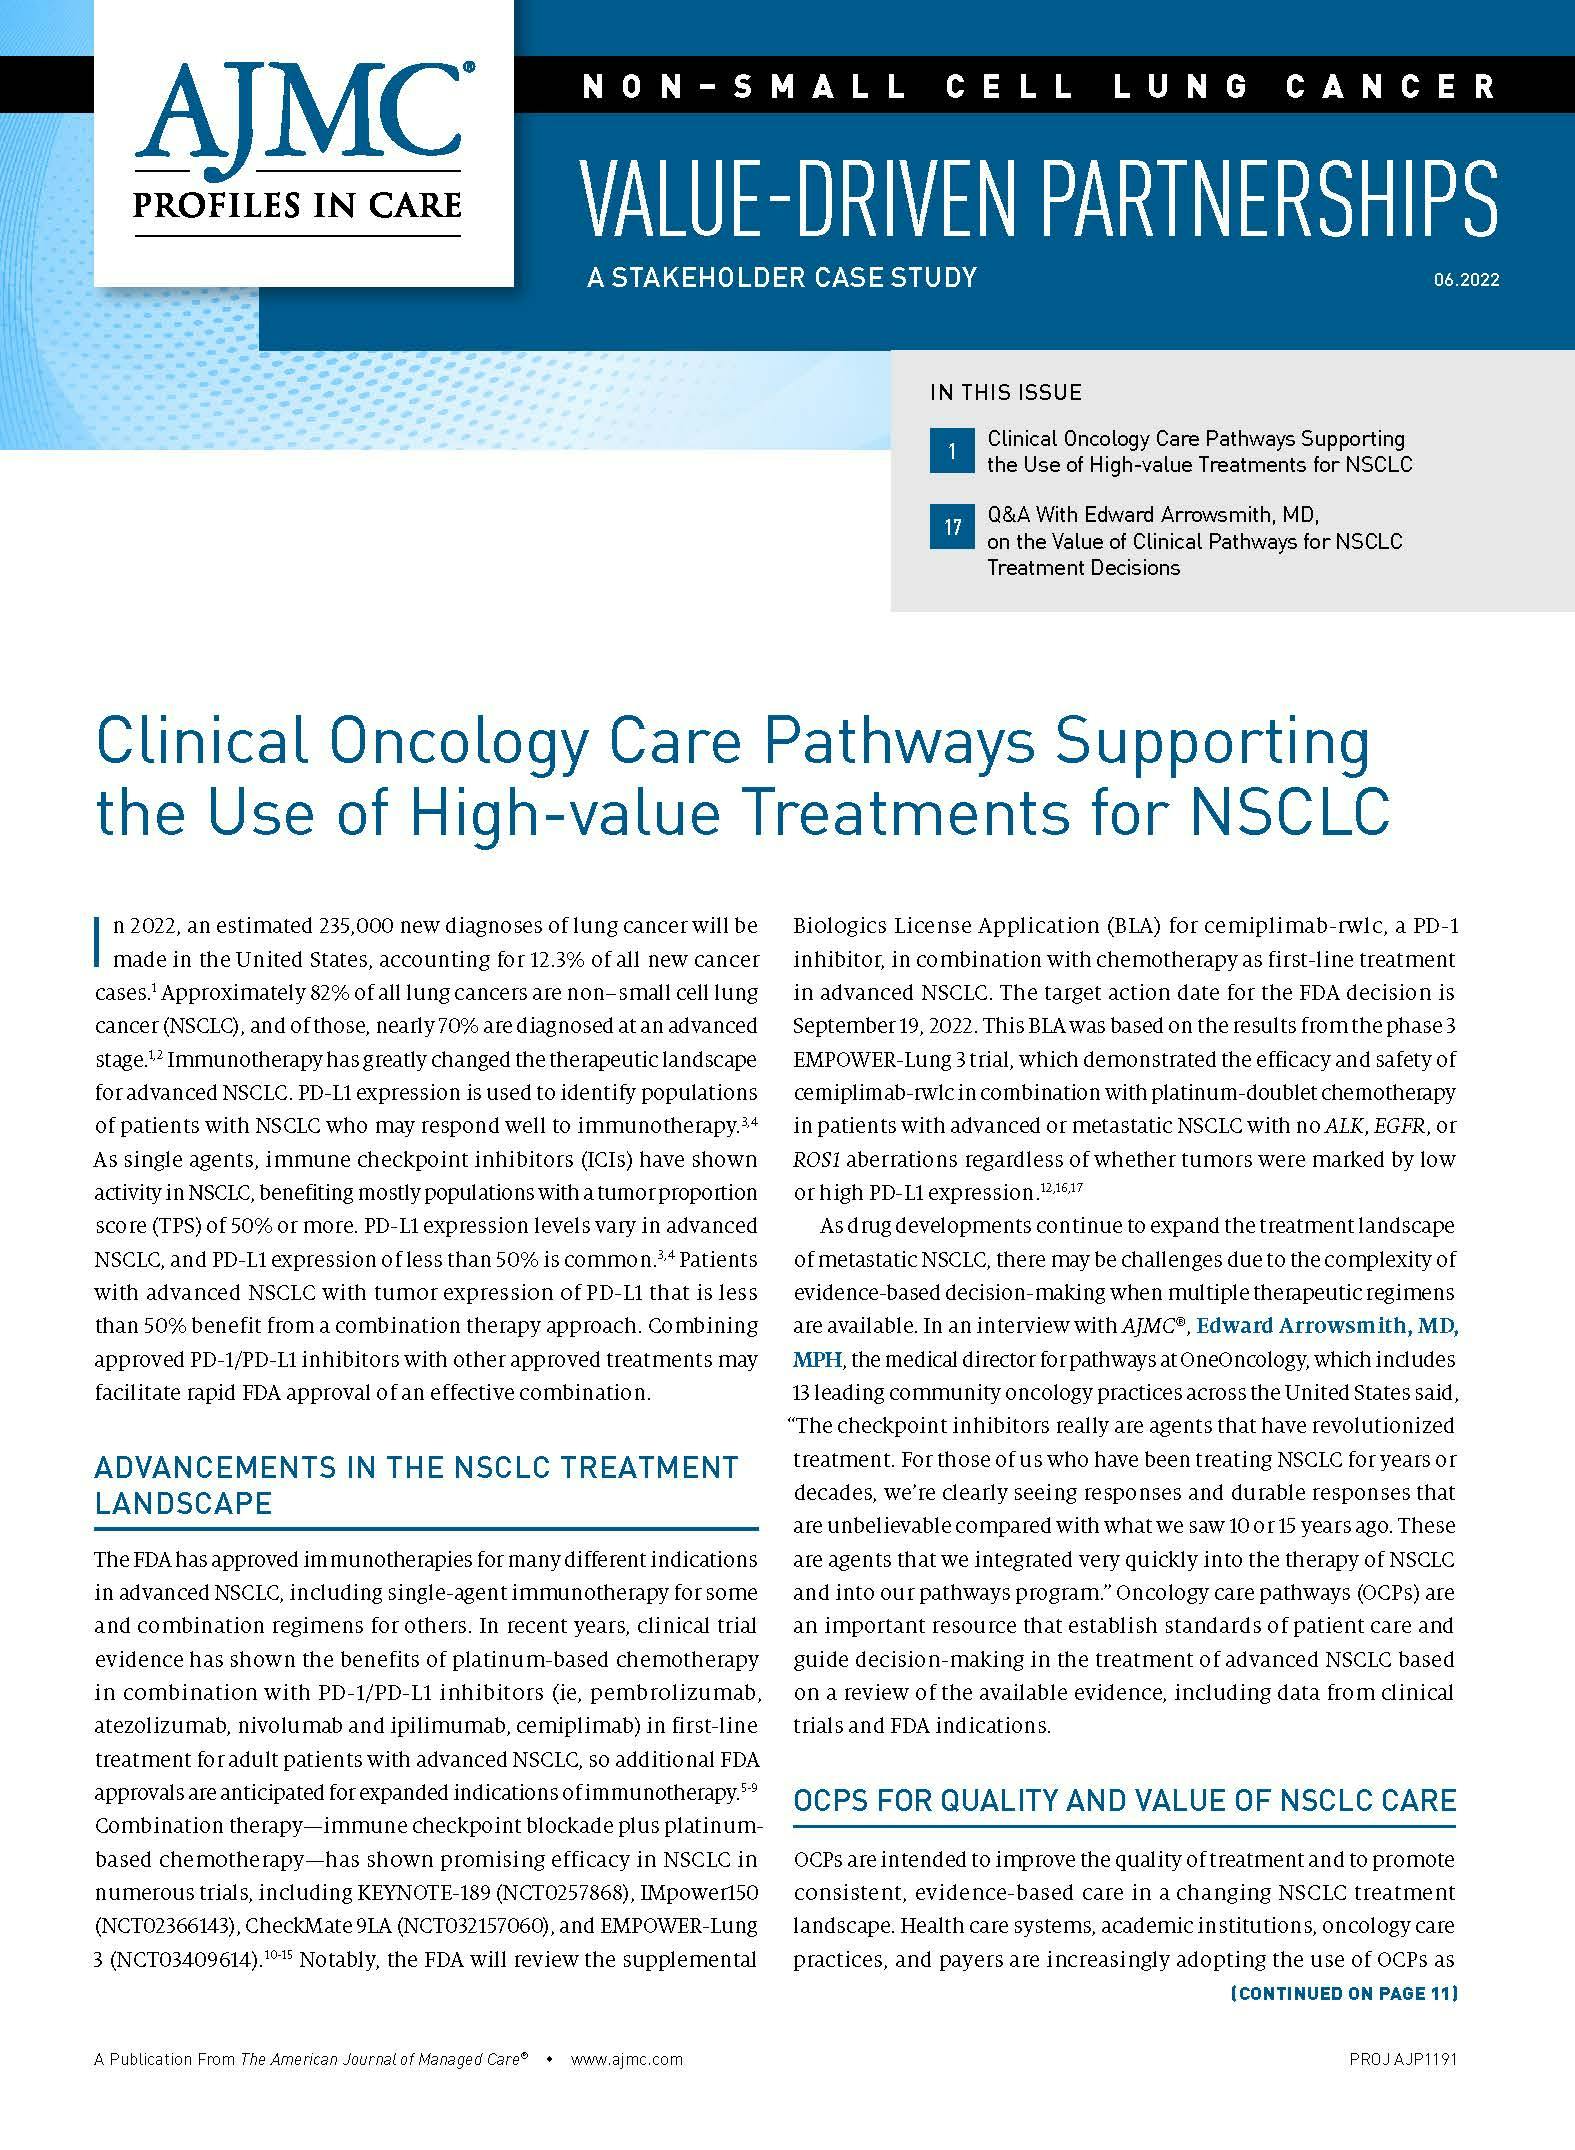 Oncology Care Pathways Supporting the Use of High-value Treatments for NSCLC